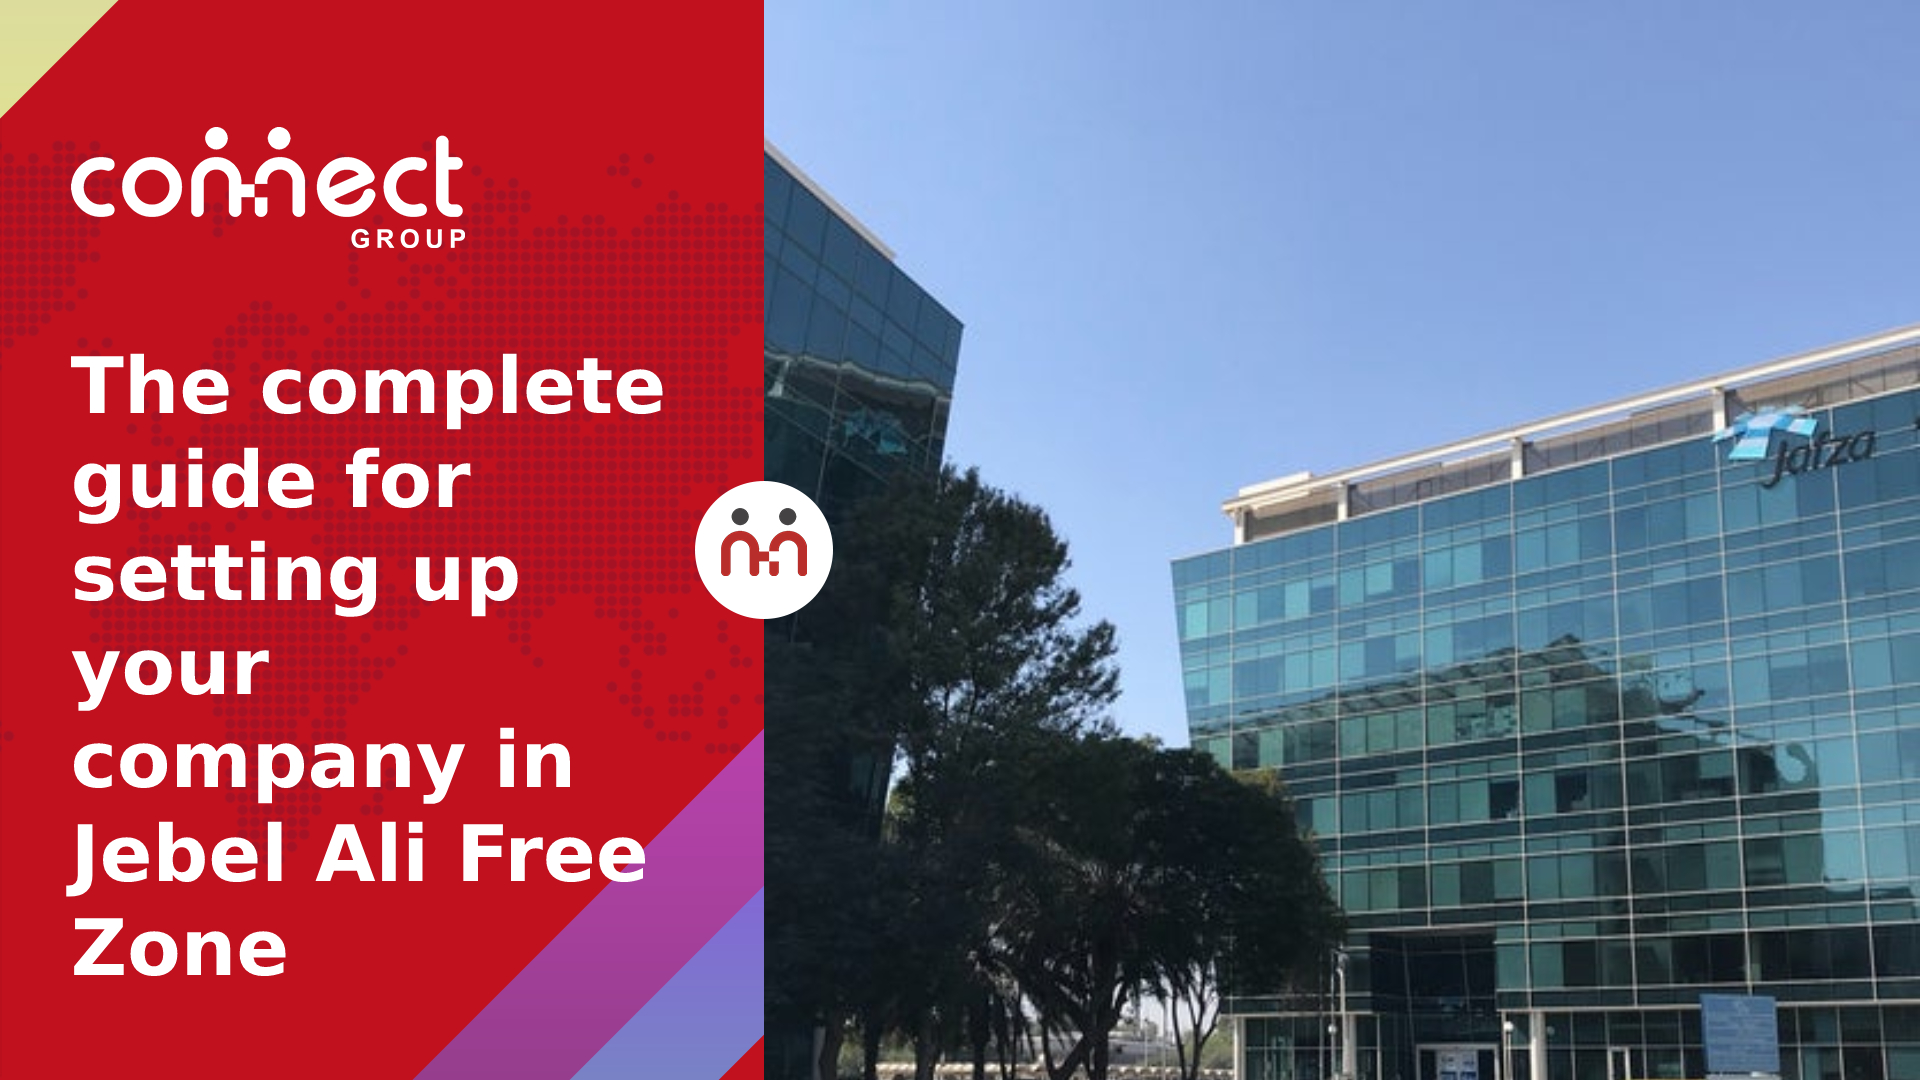 The complete guide for setting up your company in Jebel Ali Free Zone